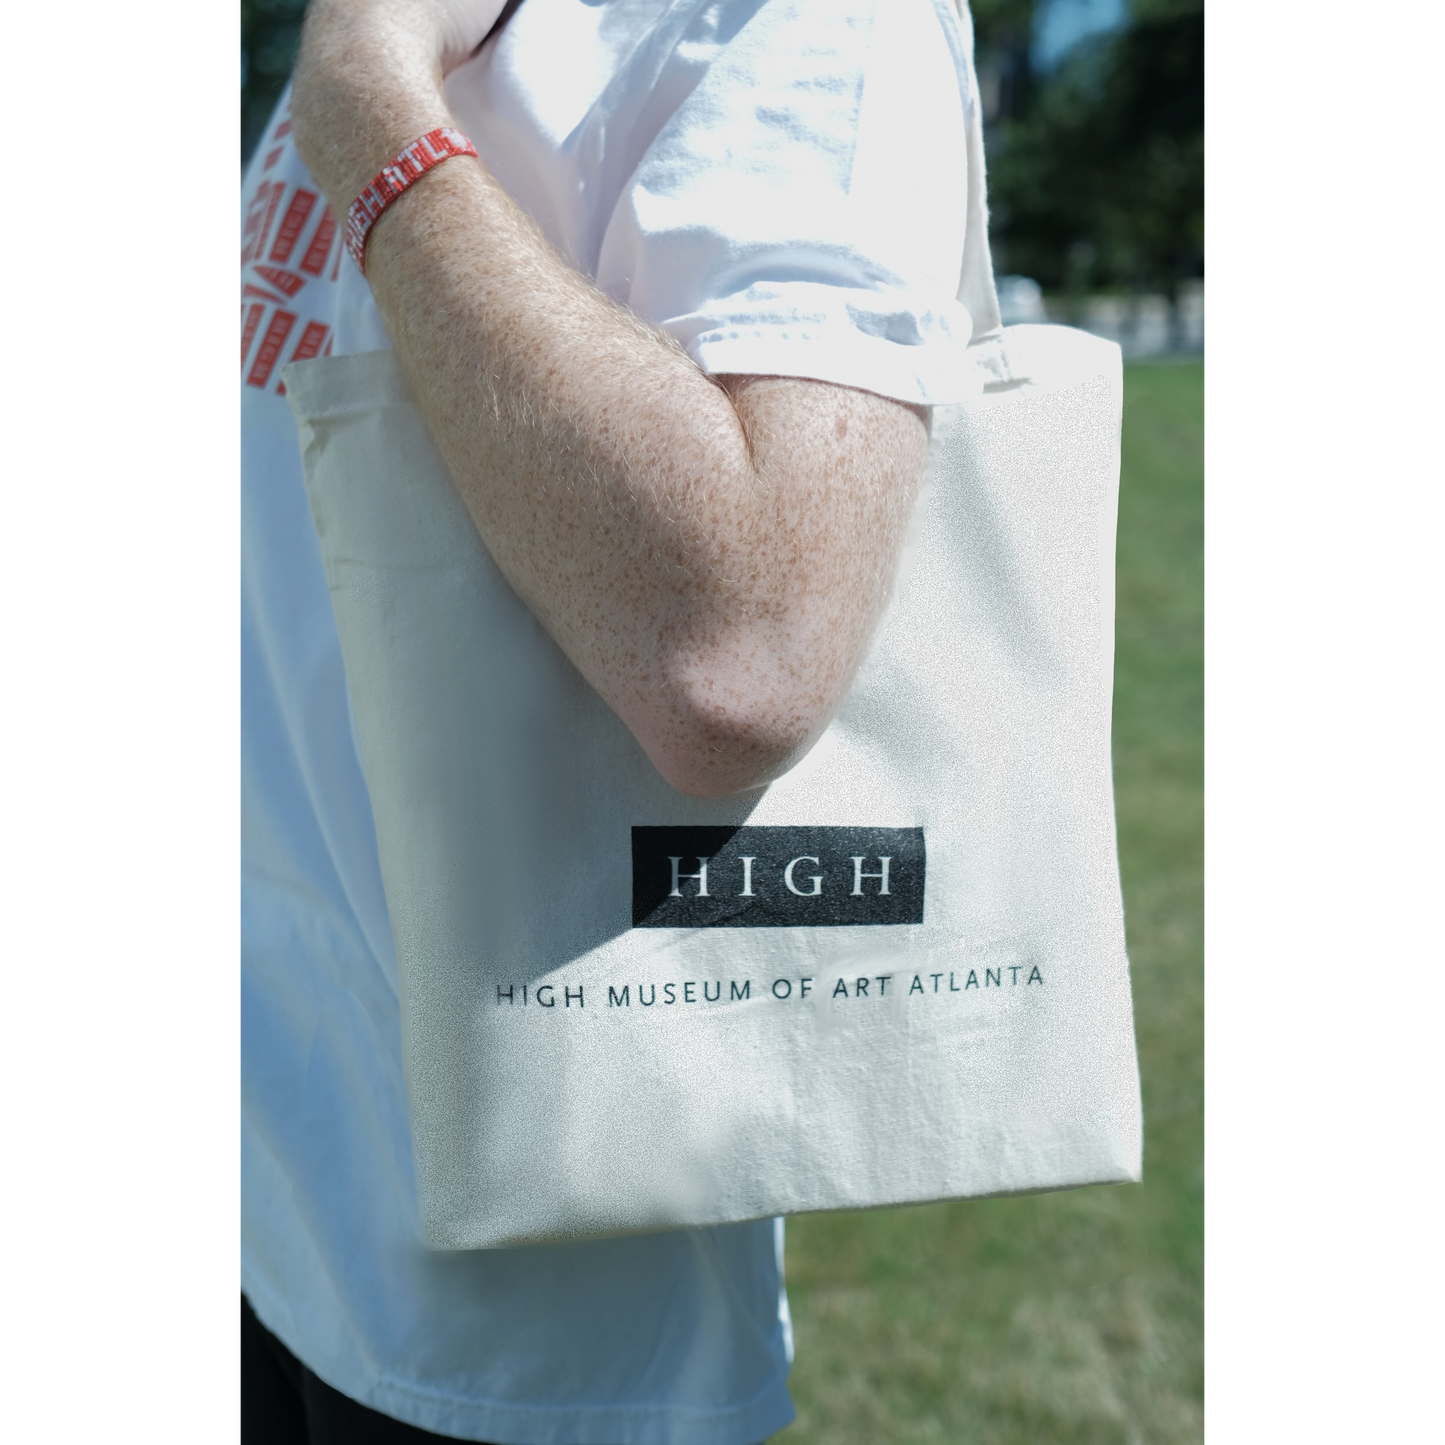 High Museum Canvas Tote Bag